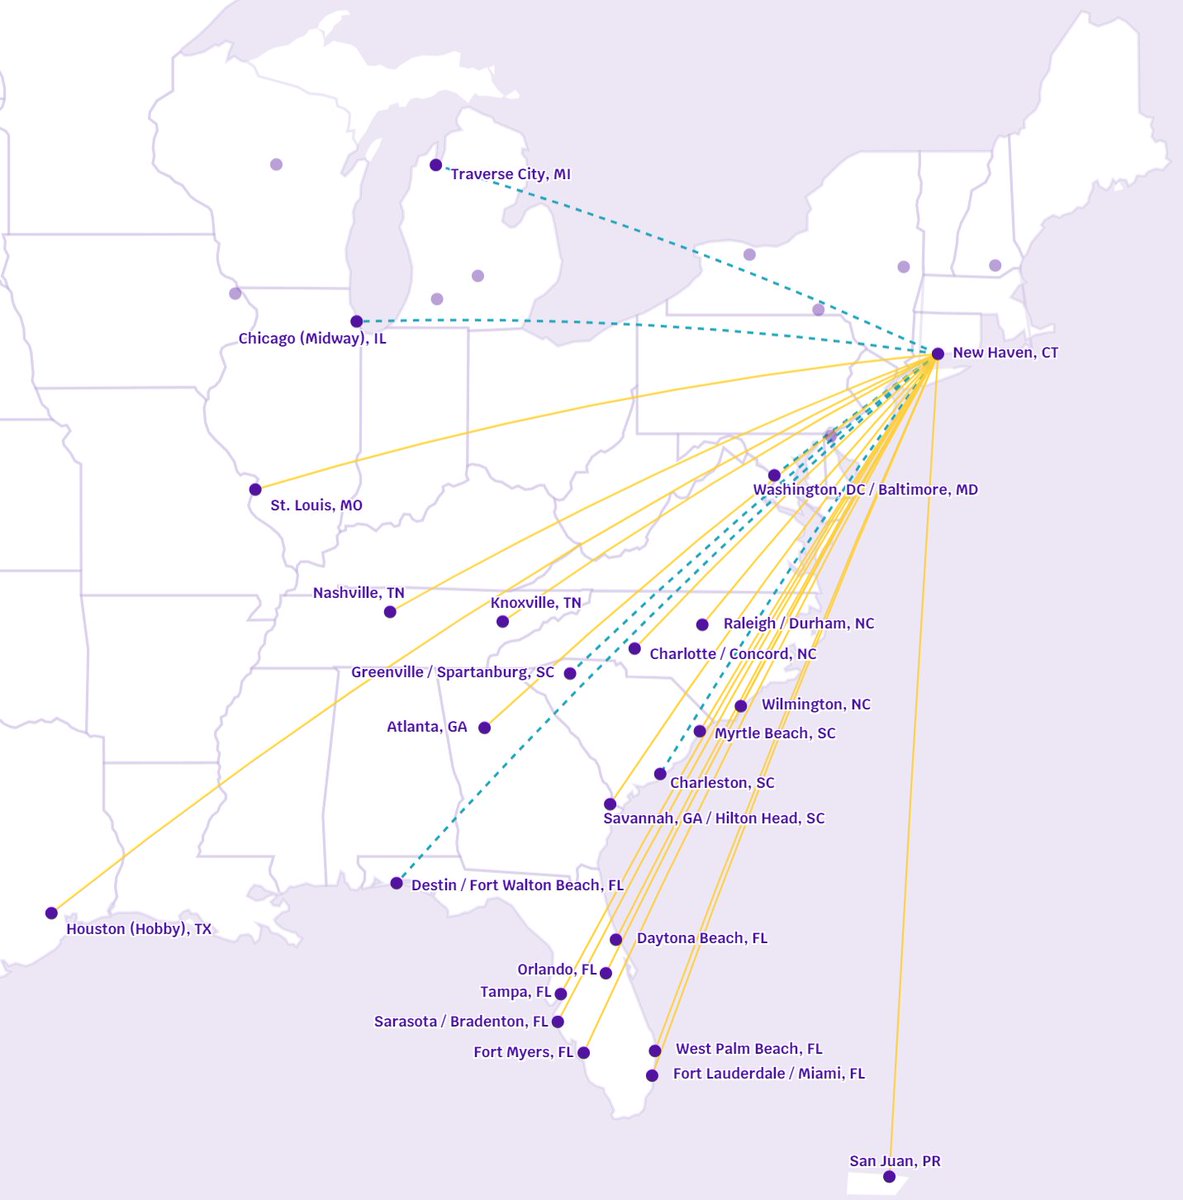 Over the past couple years, the number of direct flights to the New Haven airport has grown from 0 to 23 aveloair.com/destinations #nhv @FlyTweed